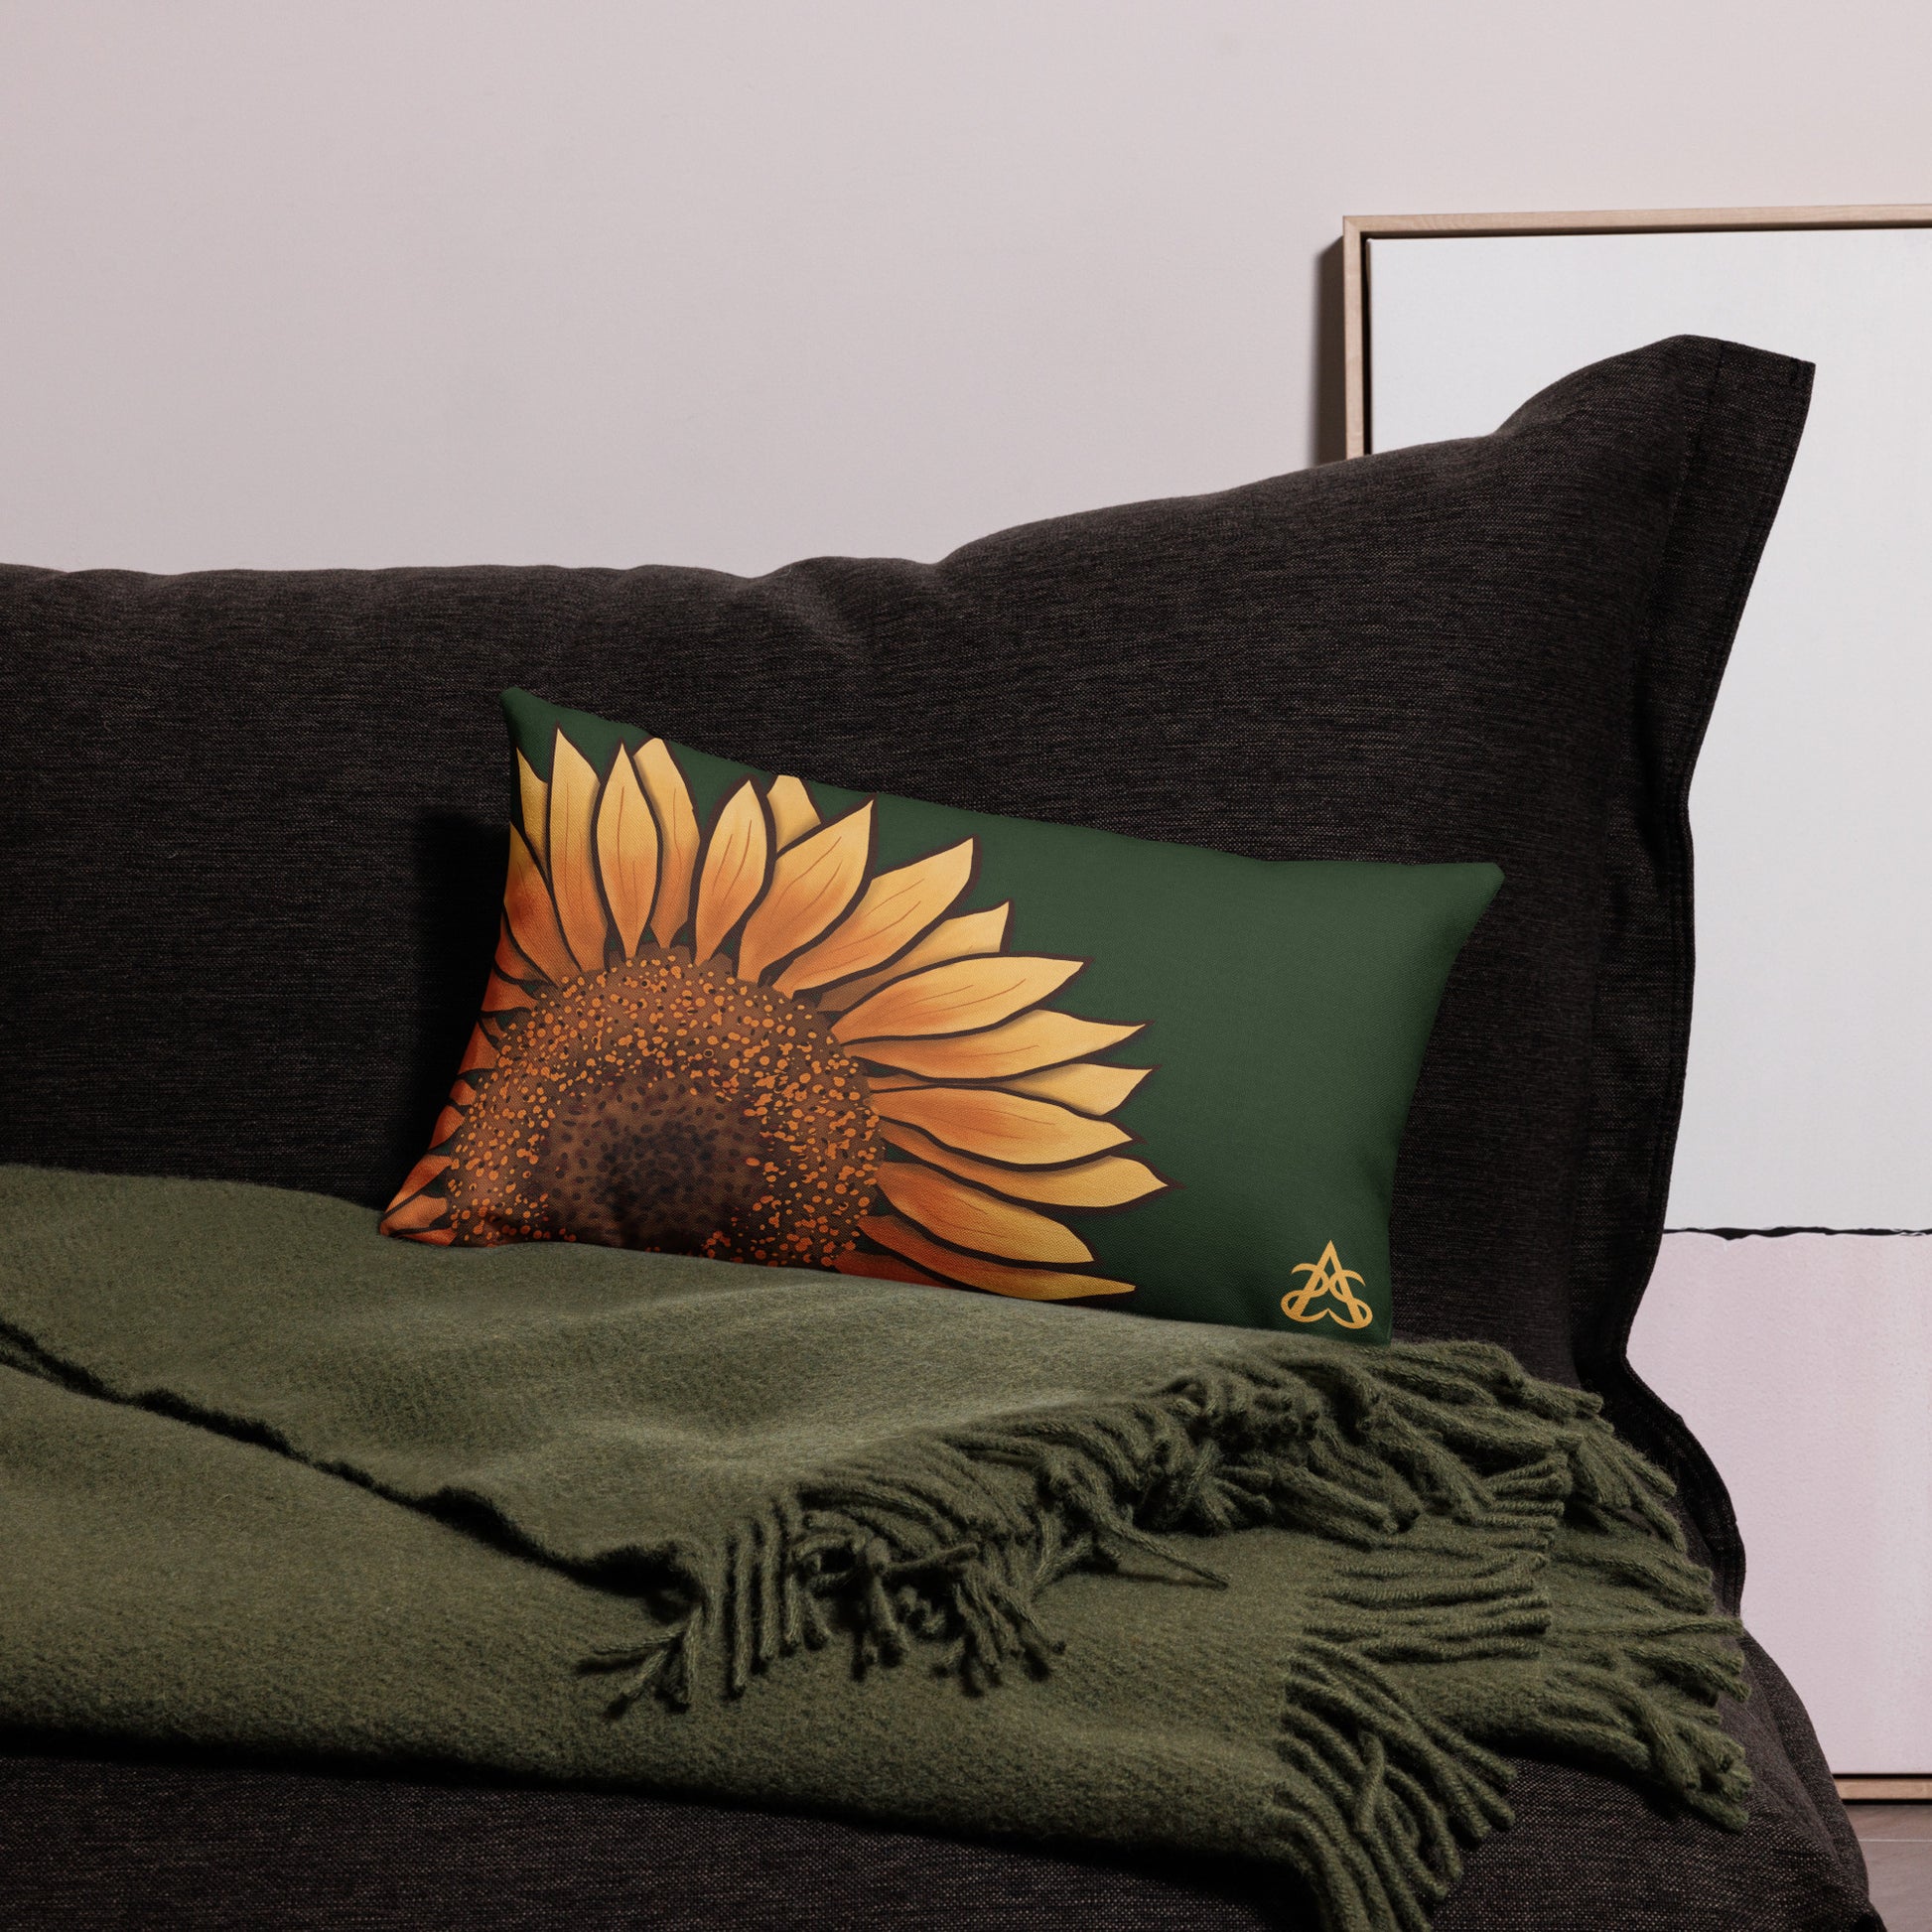 A lumbar pillow with a hand painted sunflower by Aras Sivad on a dark green background.